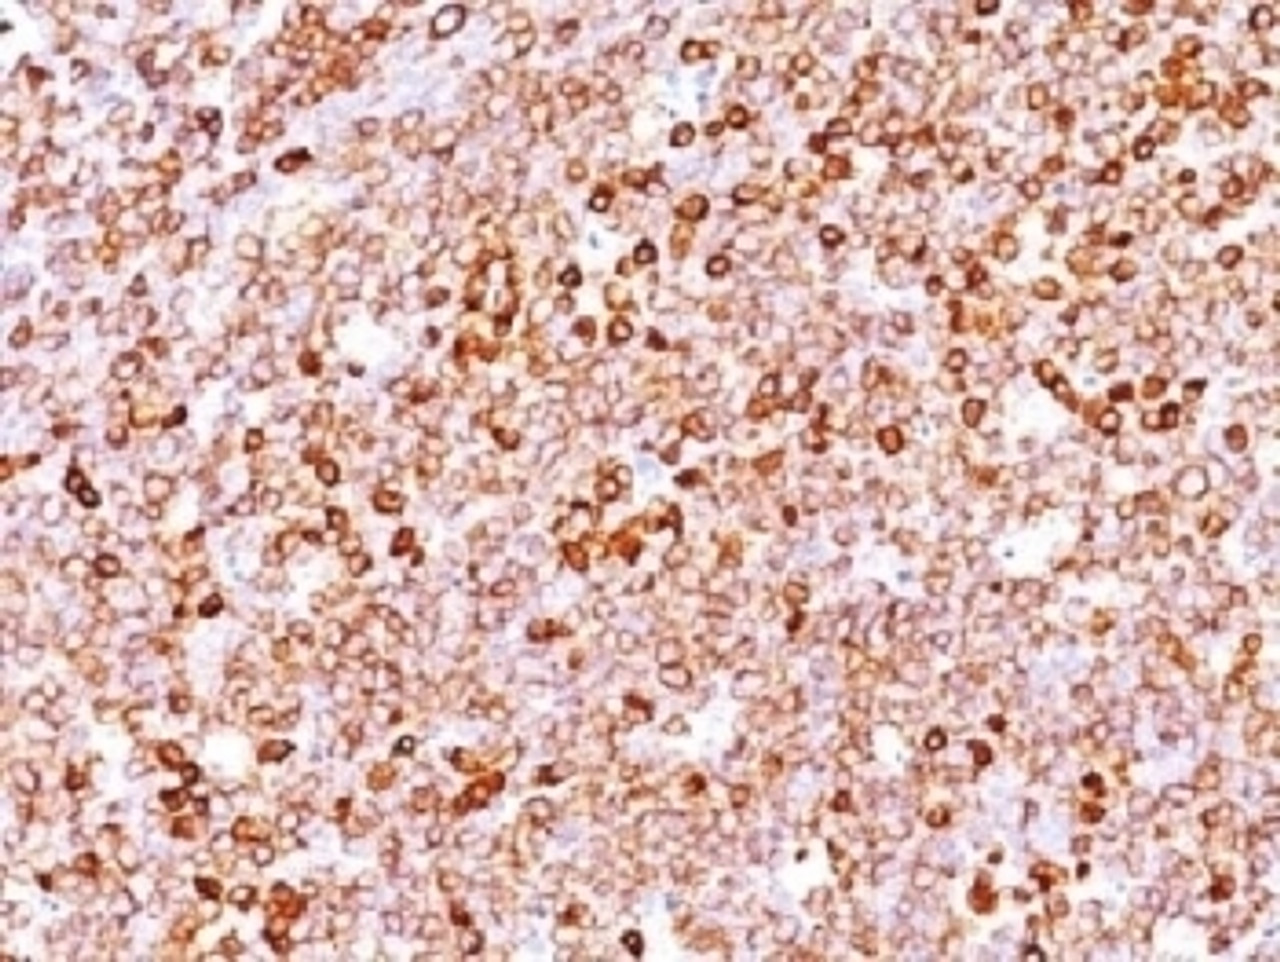 IHC testing of FFPE human tonsil with recombinant CD79a antibody (clone IGA/1688R) . Required HIER: boil tissue sections in 10mM citrate buffer, pH 6, for 10-20 min followed by cooling at RT for 20 min.